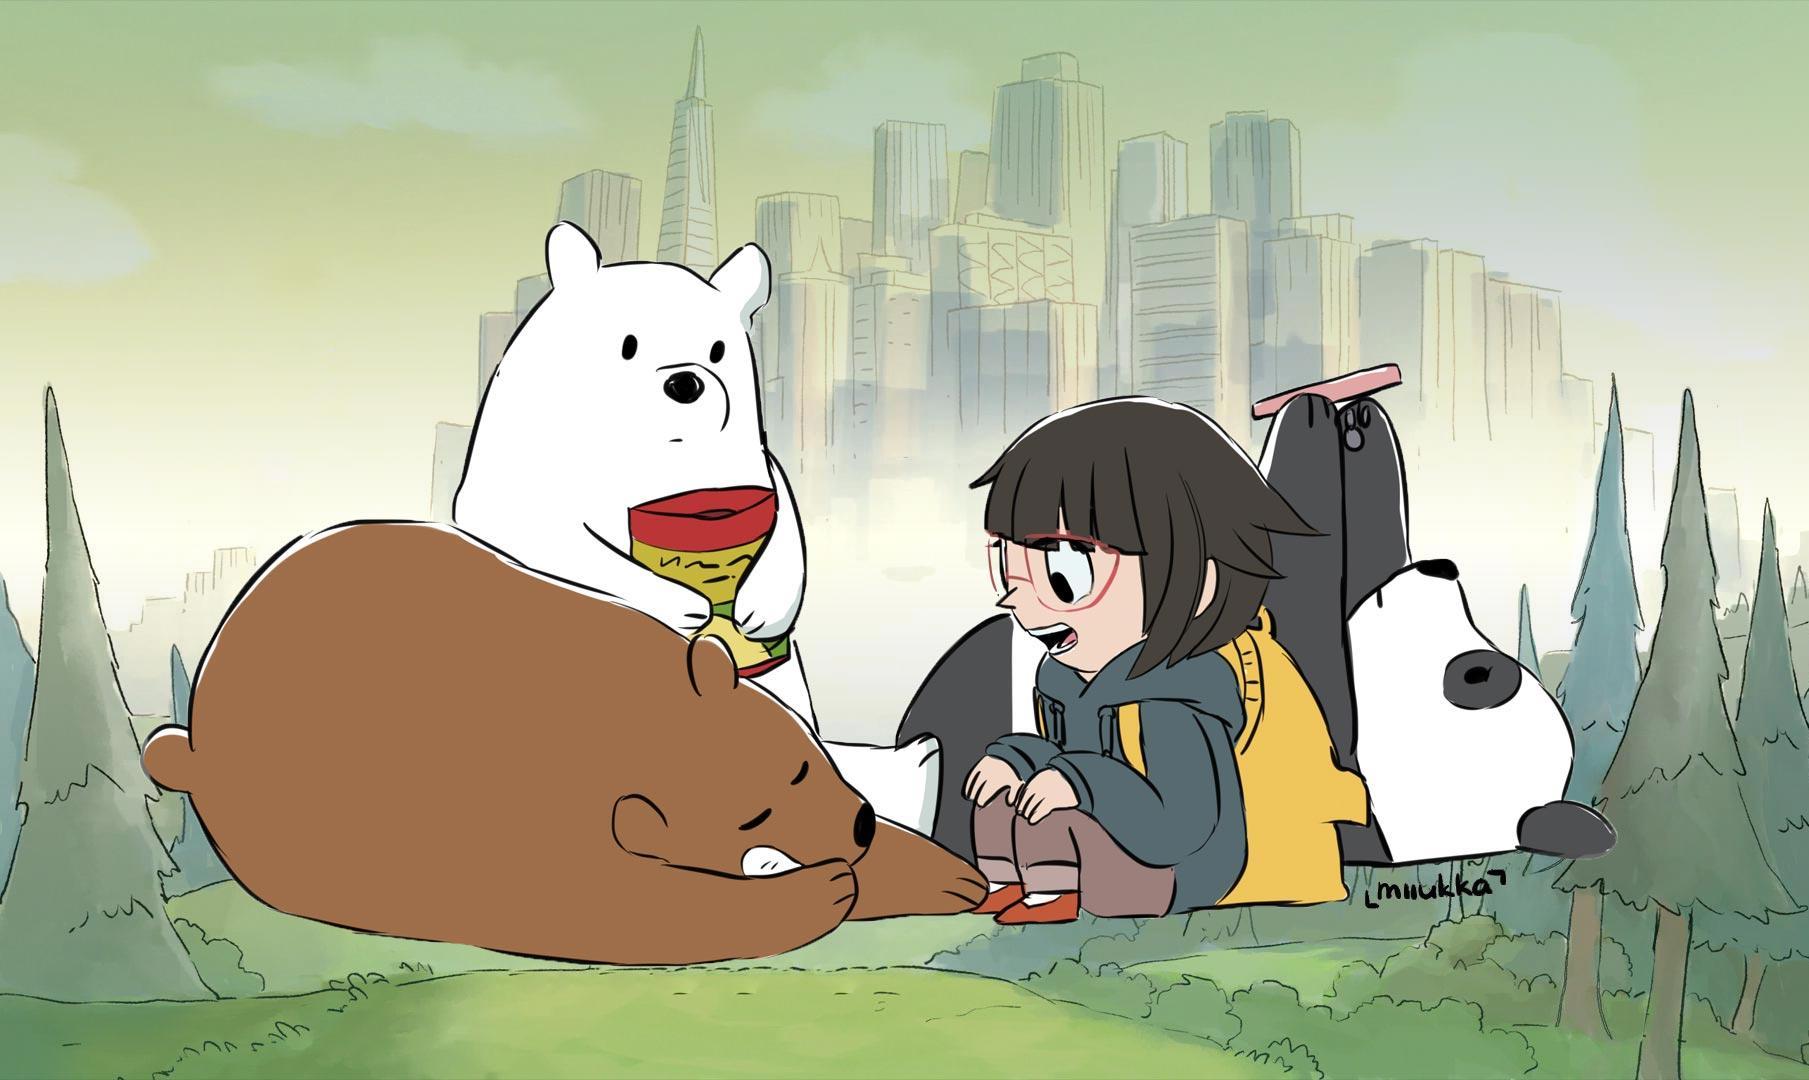 We Bare Bears Wallpaper I needed some for myself